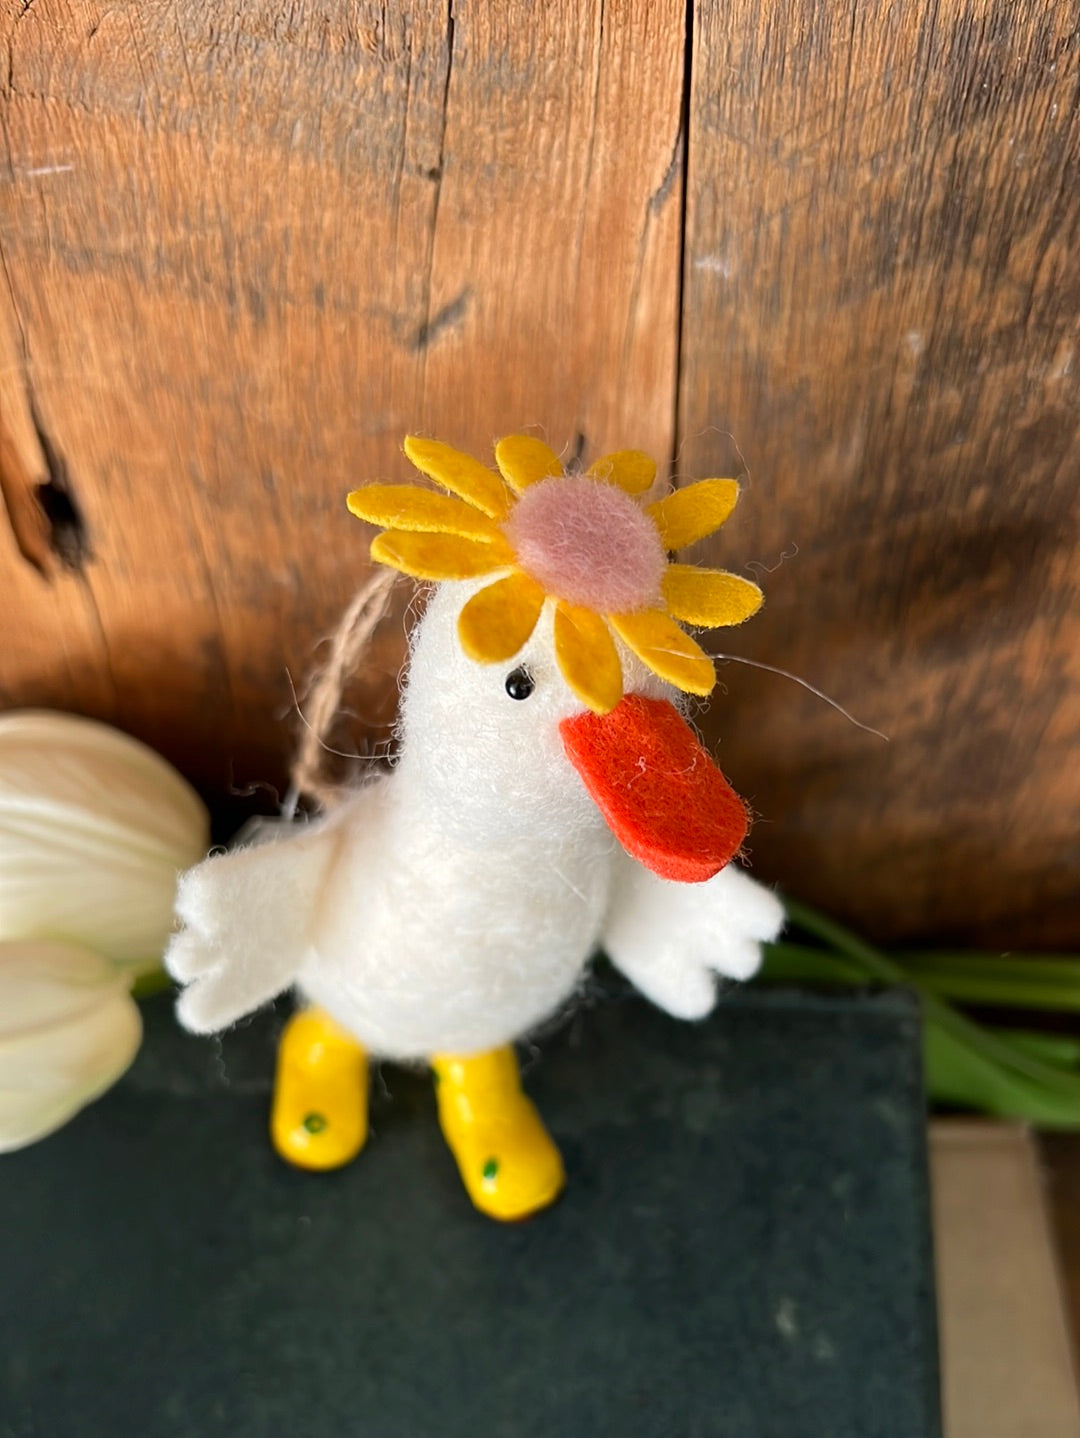 Felt White Duck Ornament with Daisy Hat and Rain Boots